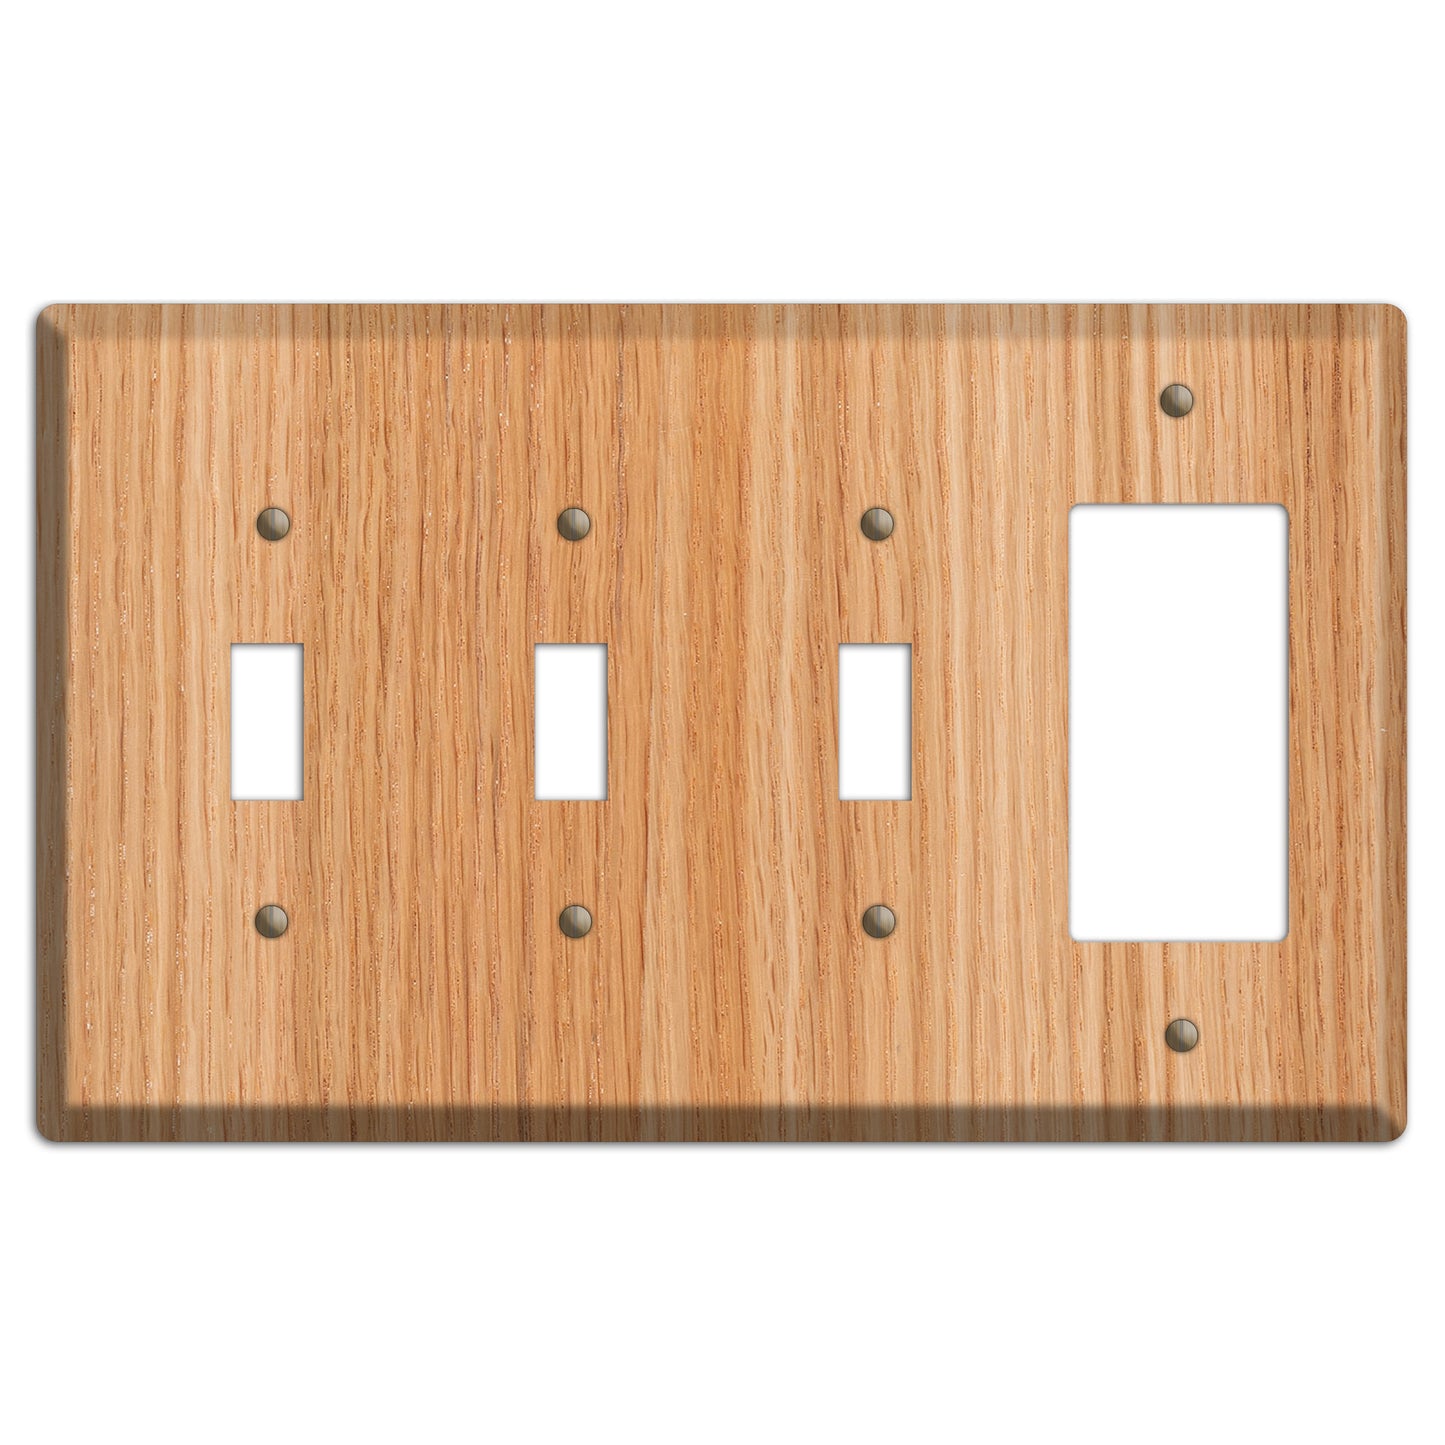 Unfinished Red Oak Wood 3 Toggle / Rocker Outlet Cover Plate